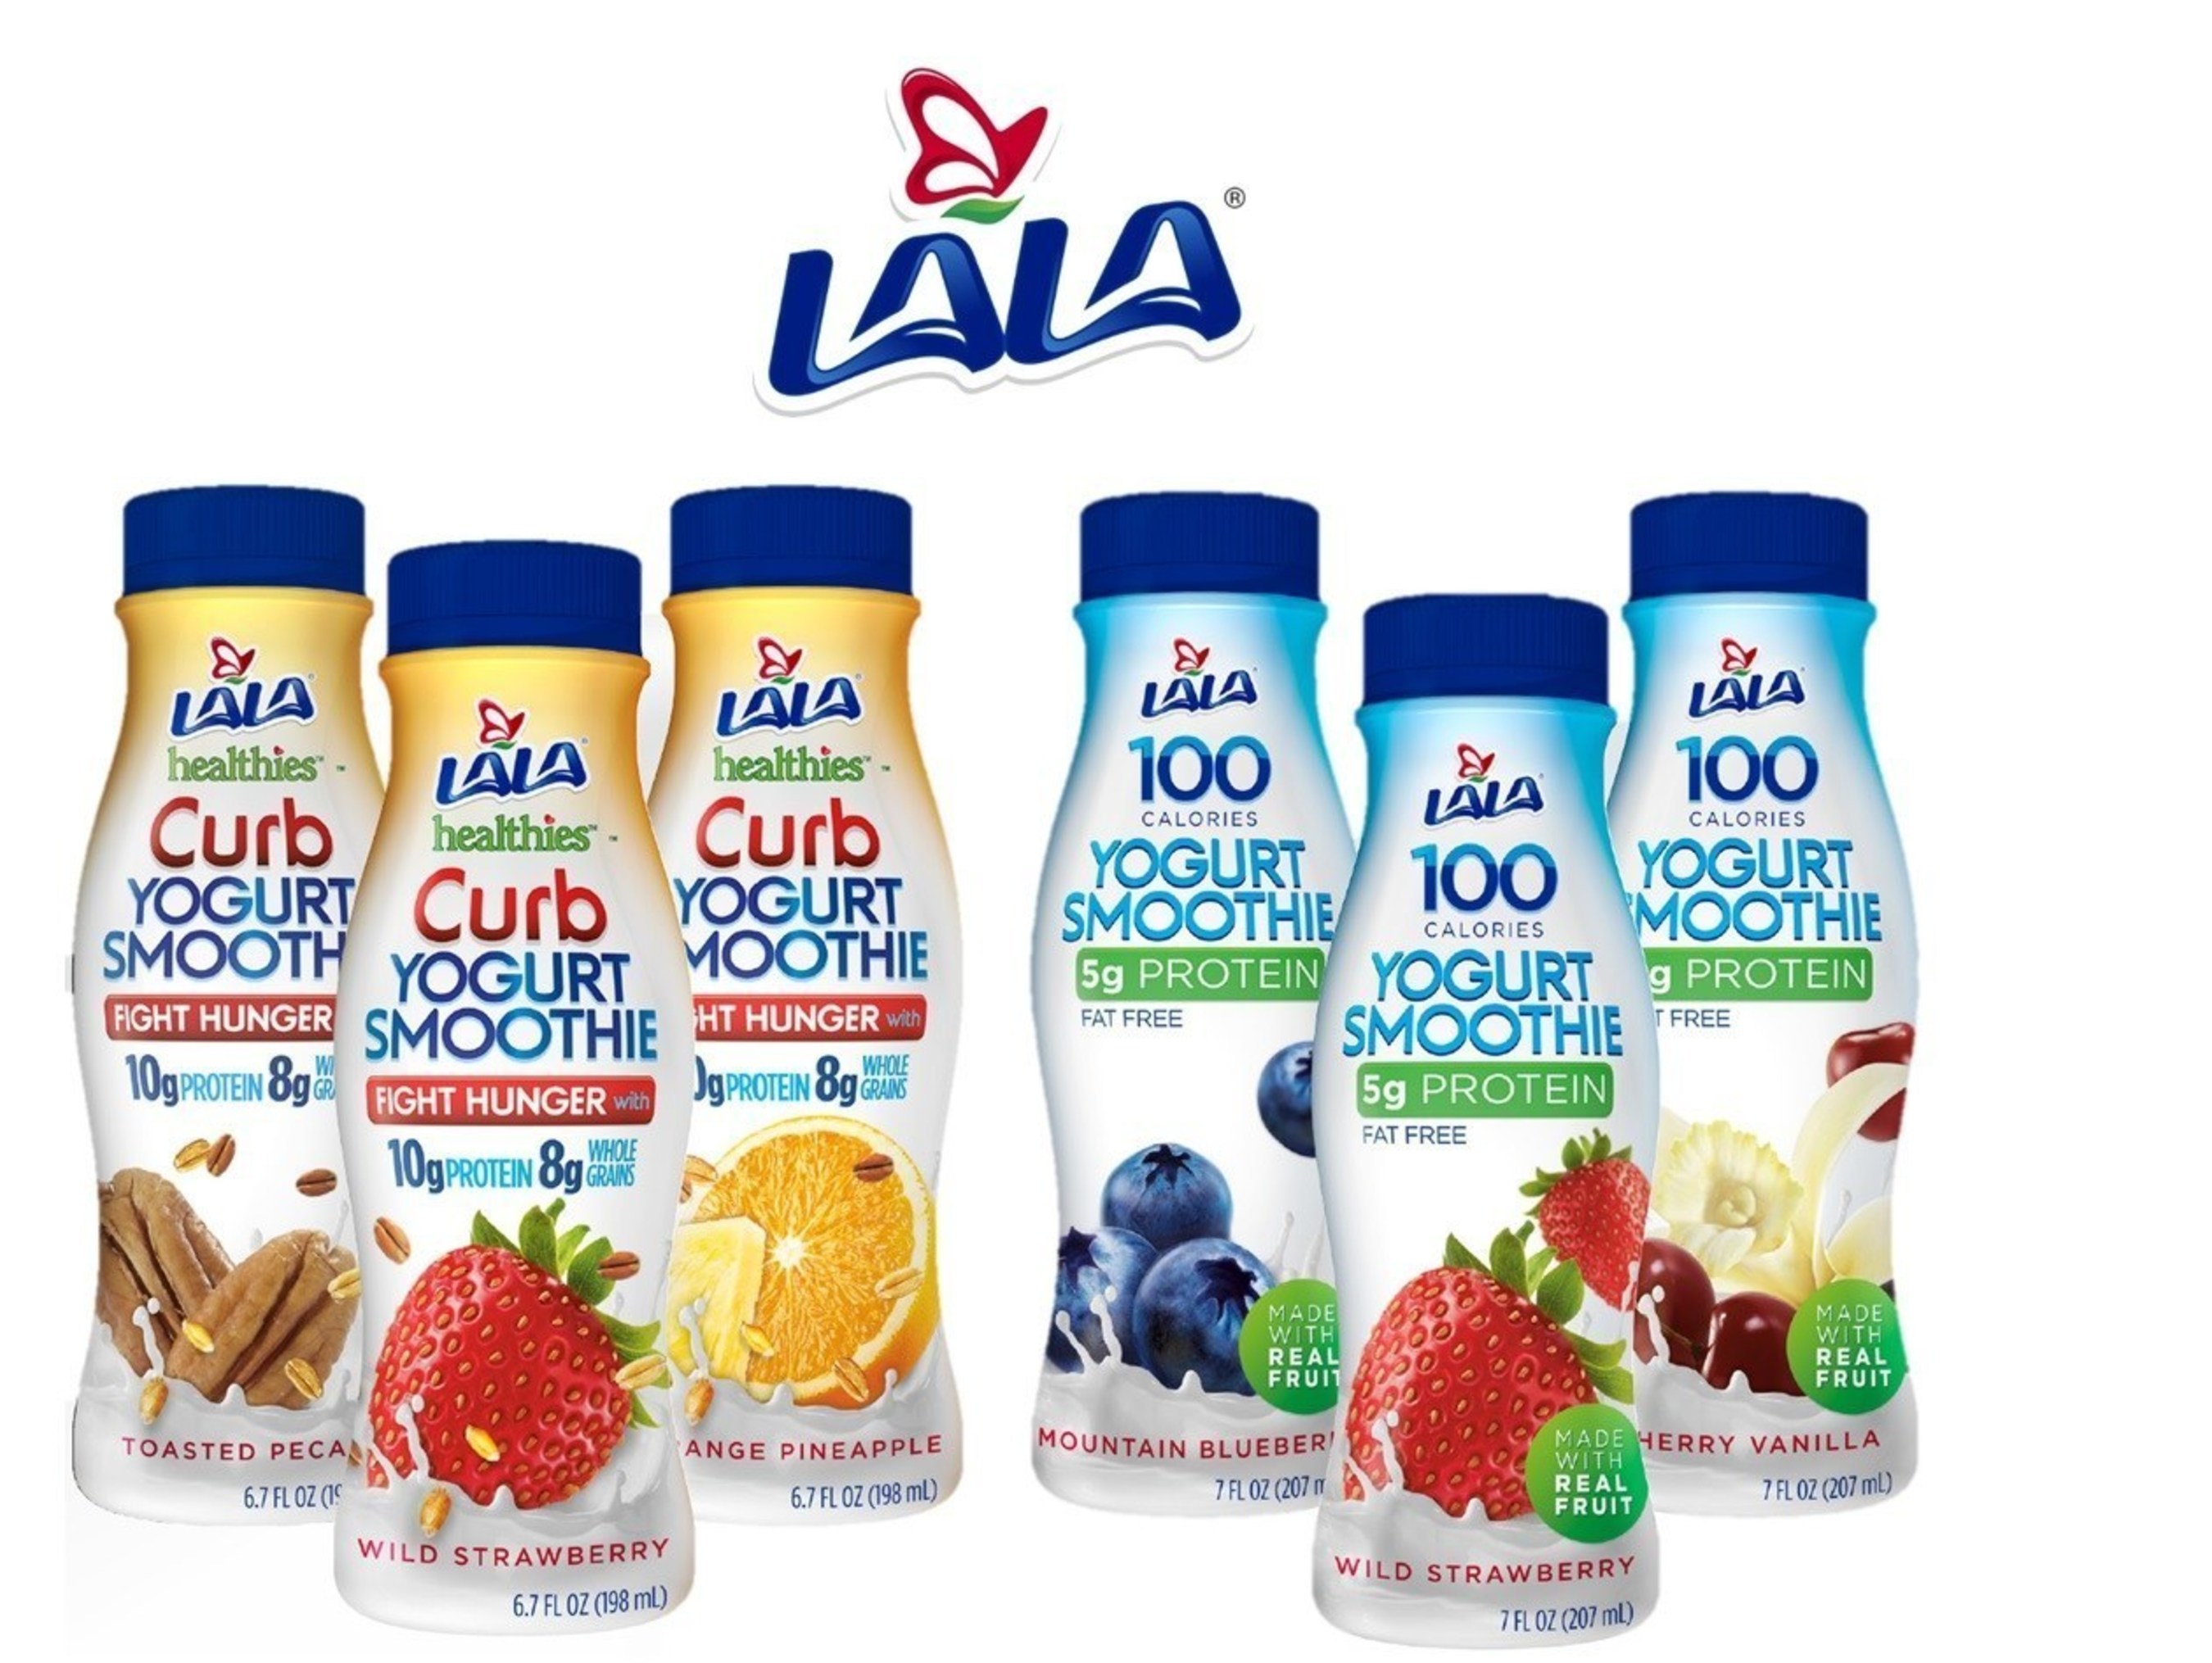 LALA, a Borden Dairy brand, announces its expansion with the debut of new LALA Healthies Curb, the first in the new Healthies yogurt smoothies line, and LALA 100 Calorie Yogurt Smoothies.